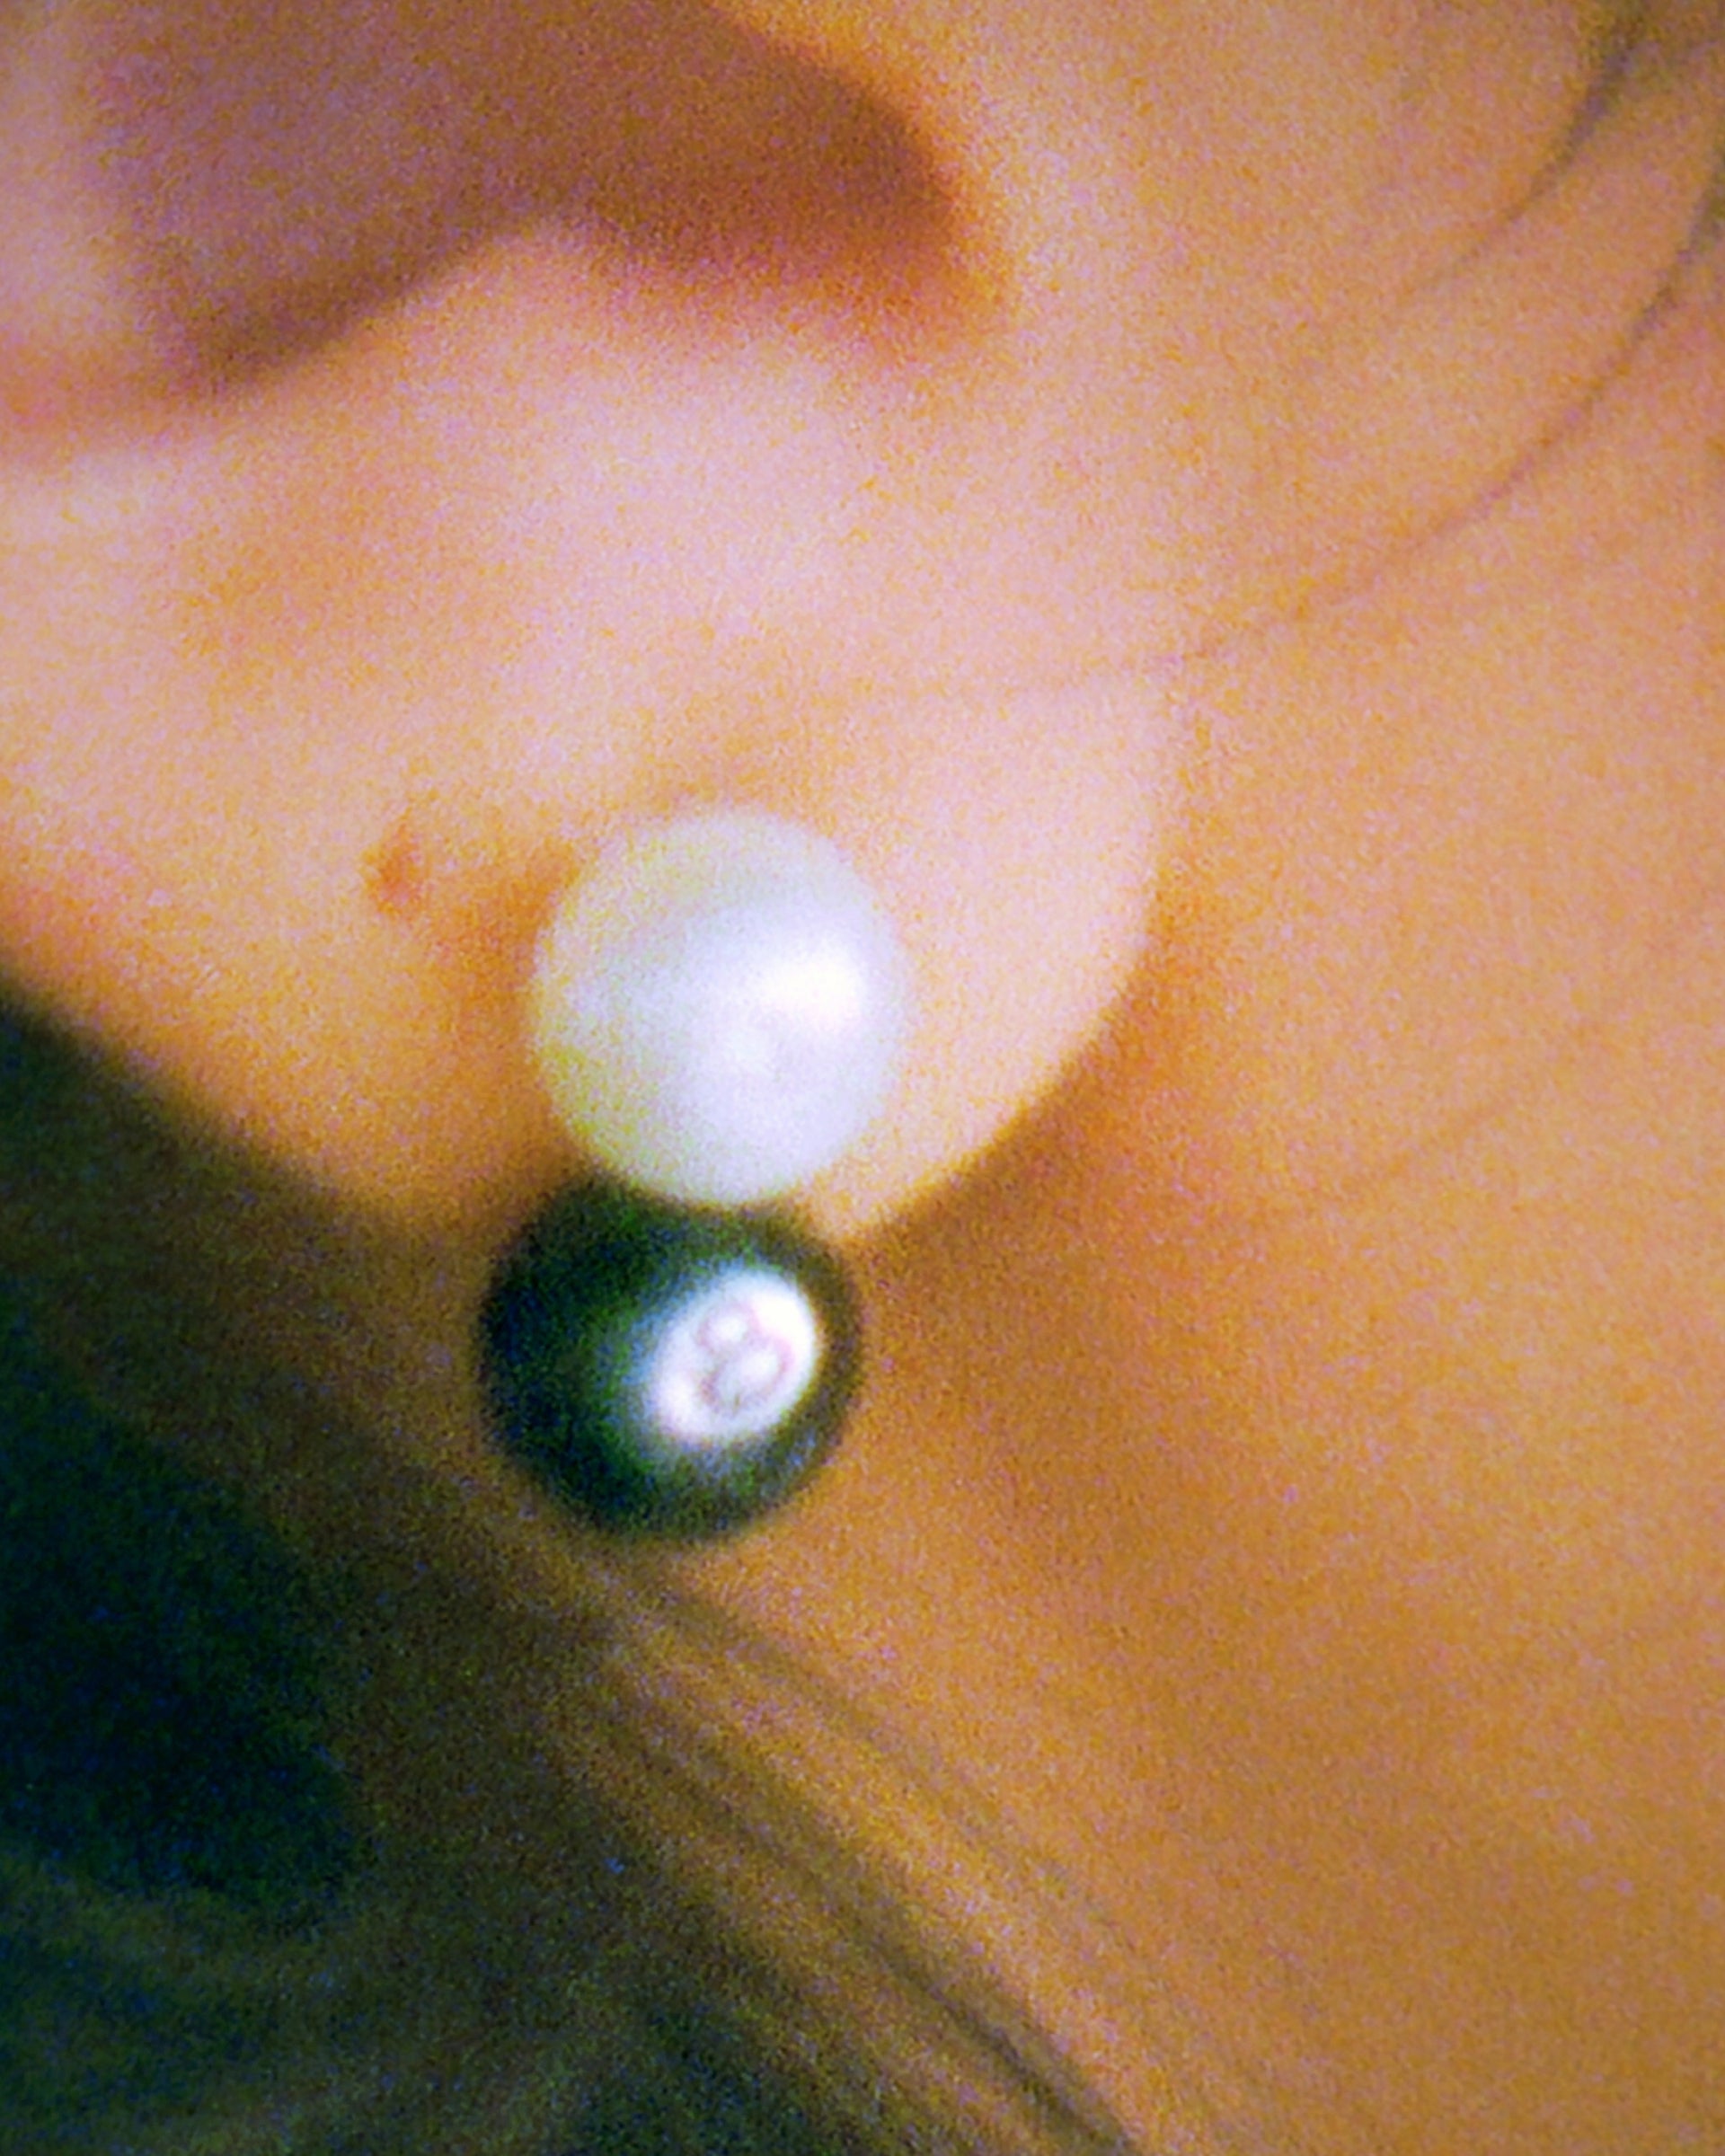 STÜSSY PEARL 8 BALL STACK EARRING ACCESSORY